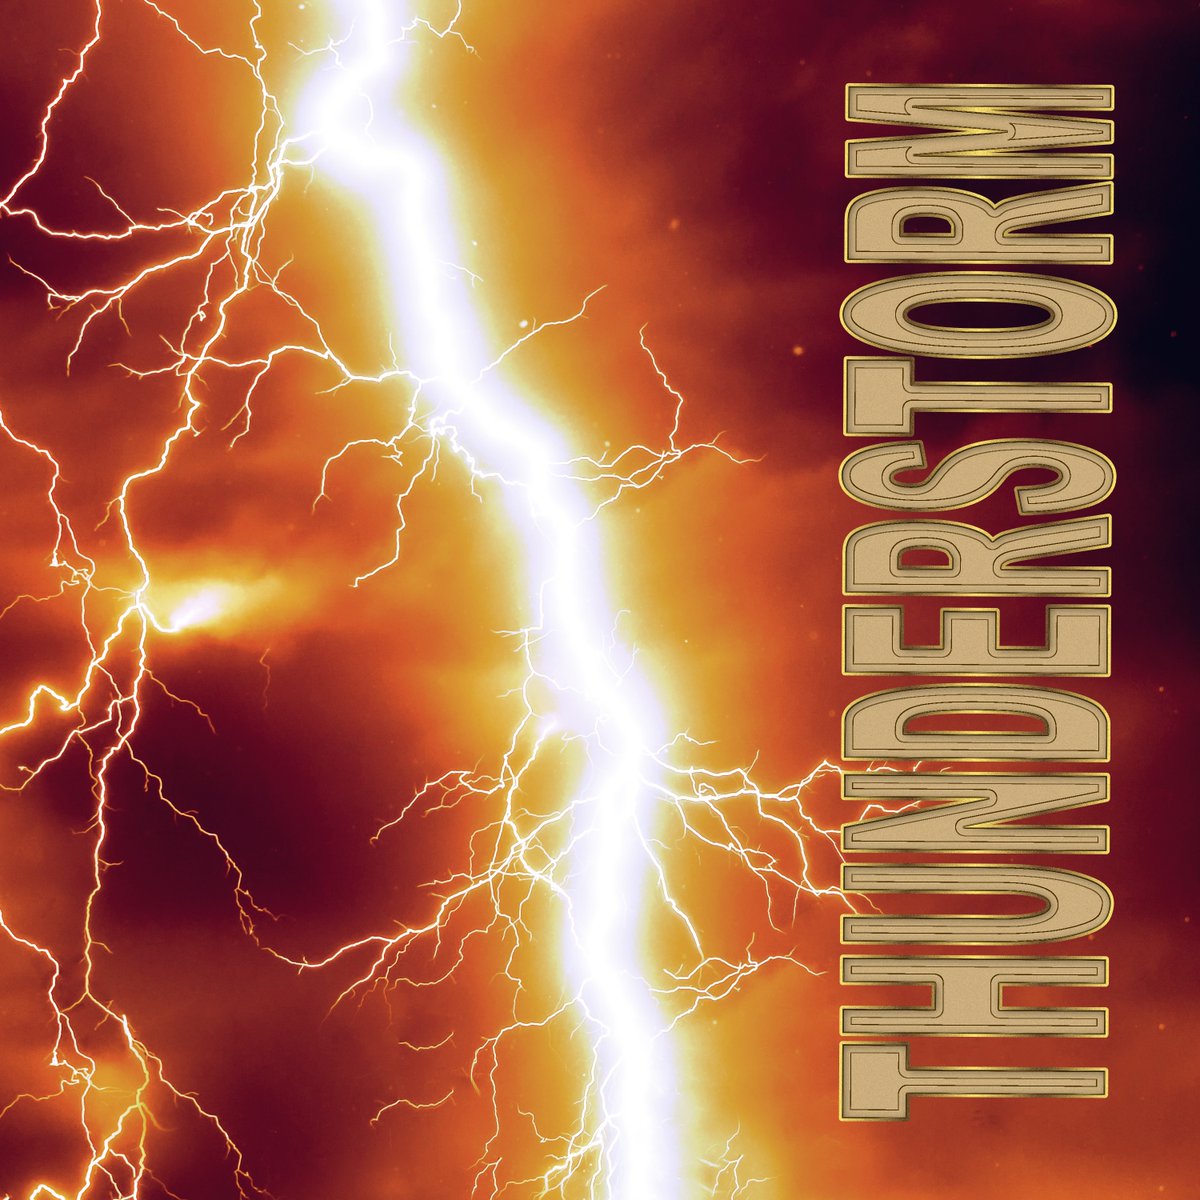 #super #epic #hiphop #rap #trap #typebeat - THUNDERSTORM #instrumental 

Out Now on: bsta.rs/DbAv9w

Visit: maypenborn.com for the latest #music #beats #nfts #digitalart & more